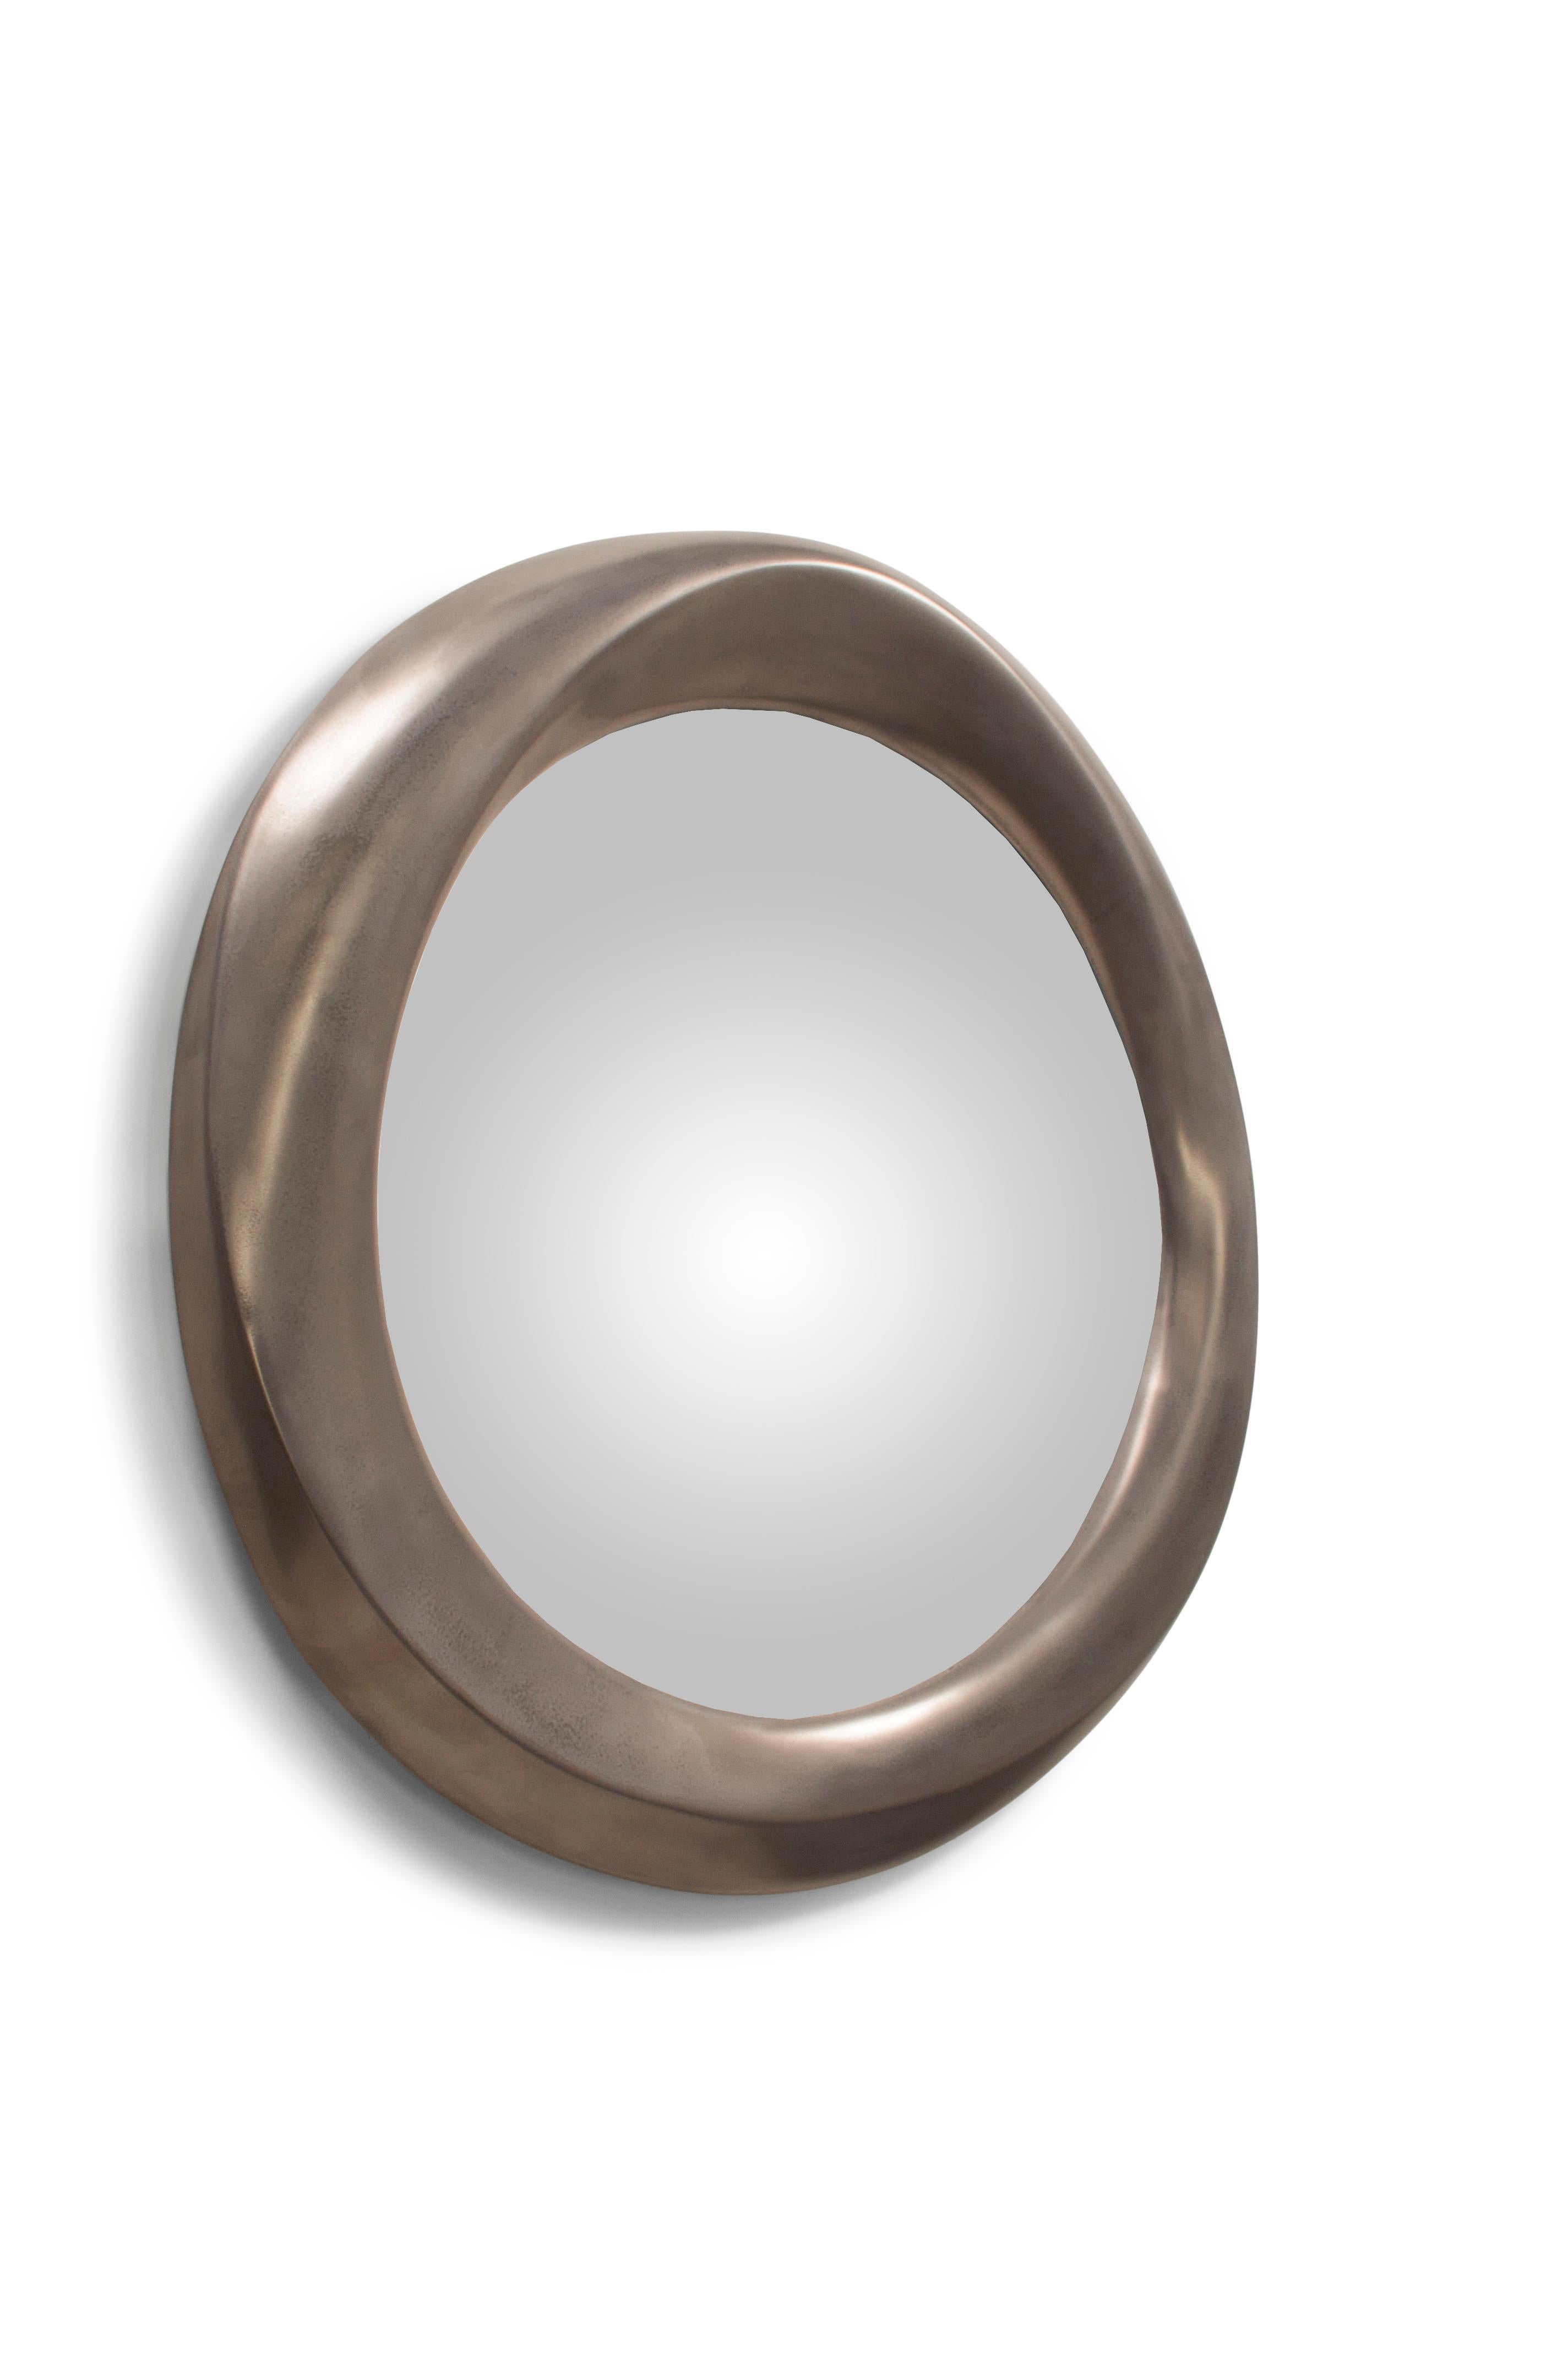 Round shape mirror with dimension of 36